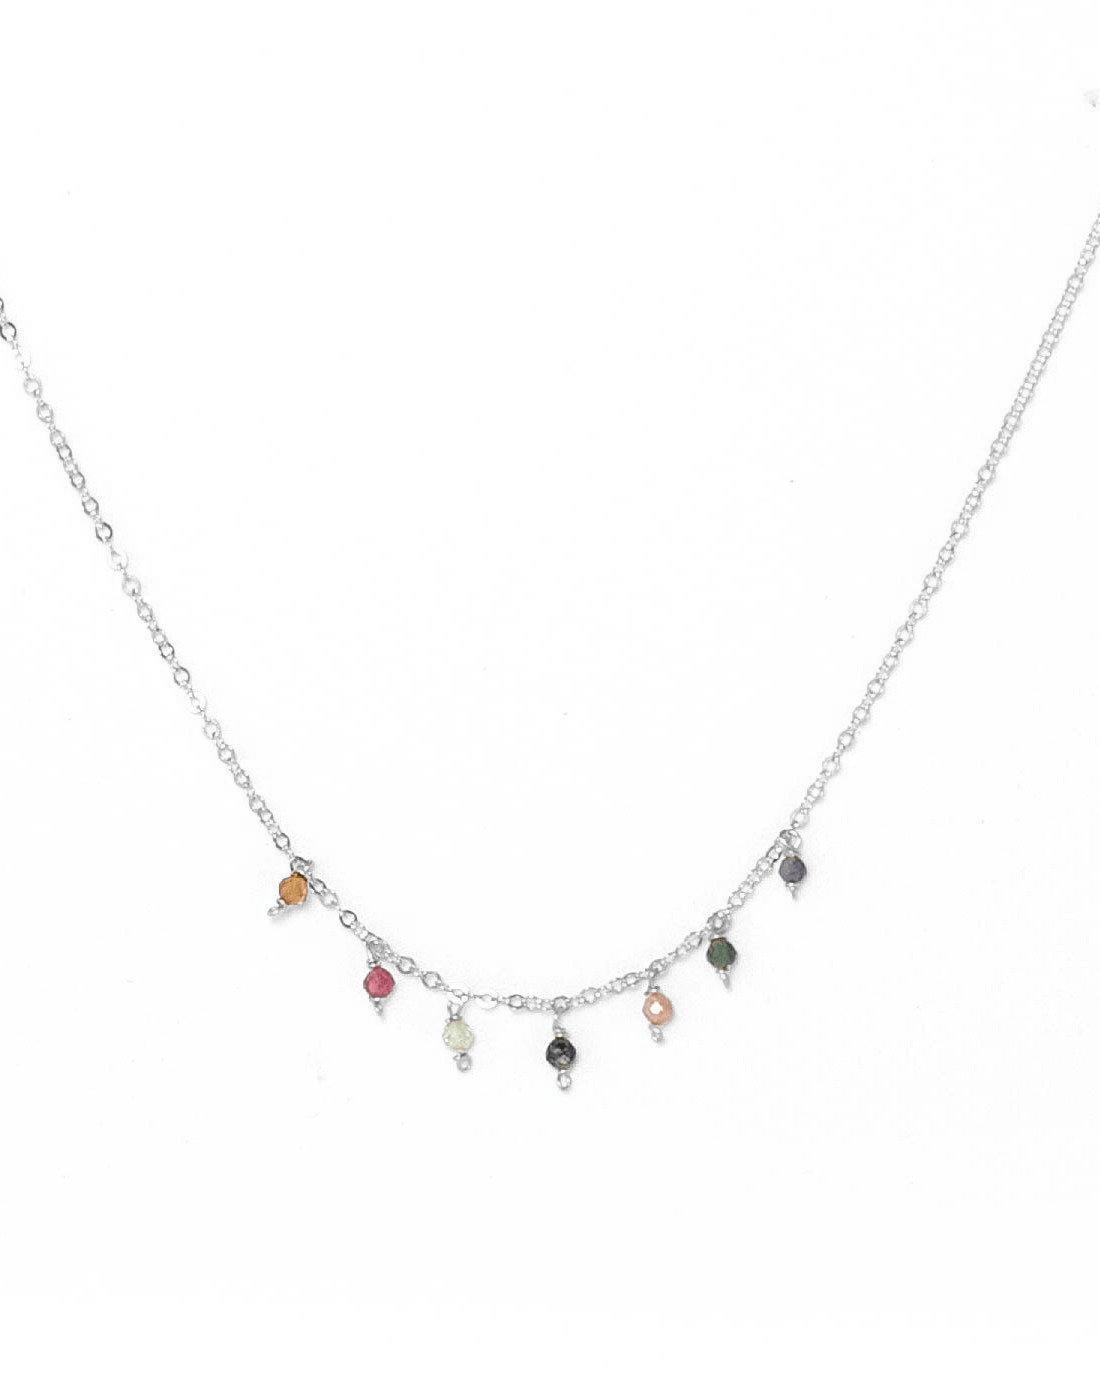 Cuy Necklace by KOZAKH. A 16 to 18 inch adjustable length necklace in Sterling Silver, featuring 2mm faceted round Watermelon Tourmaline gems.